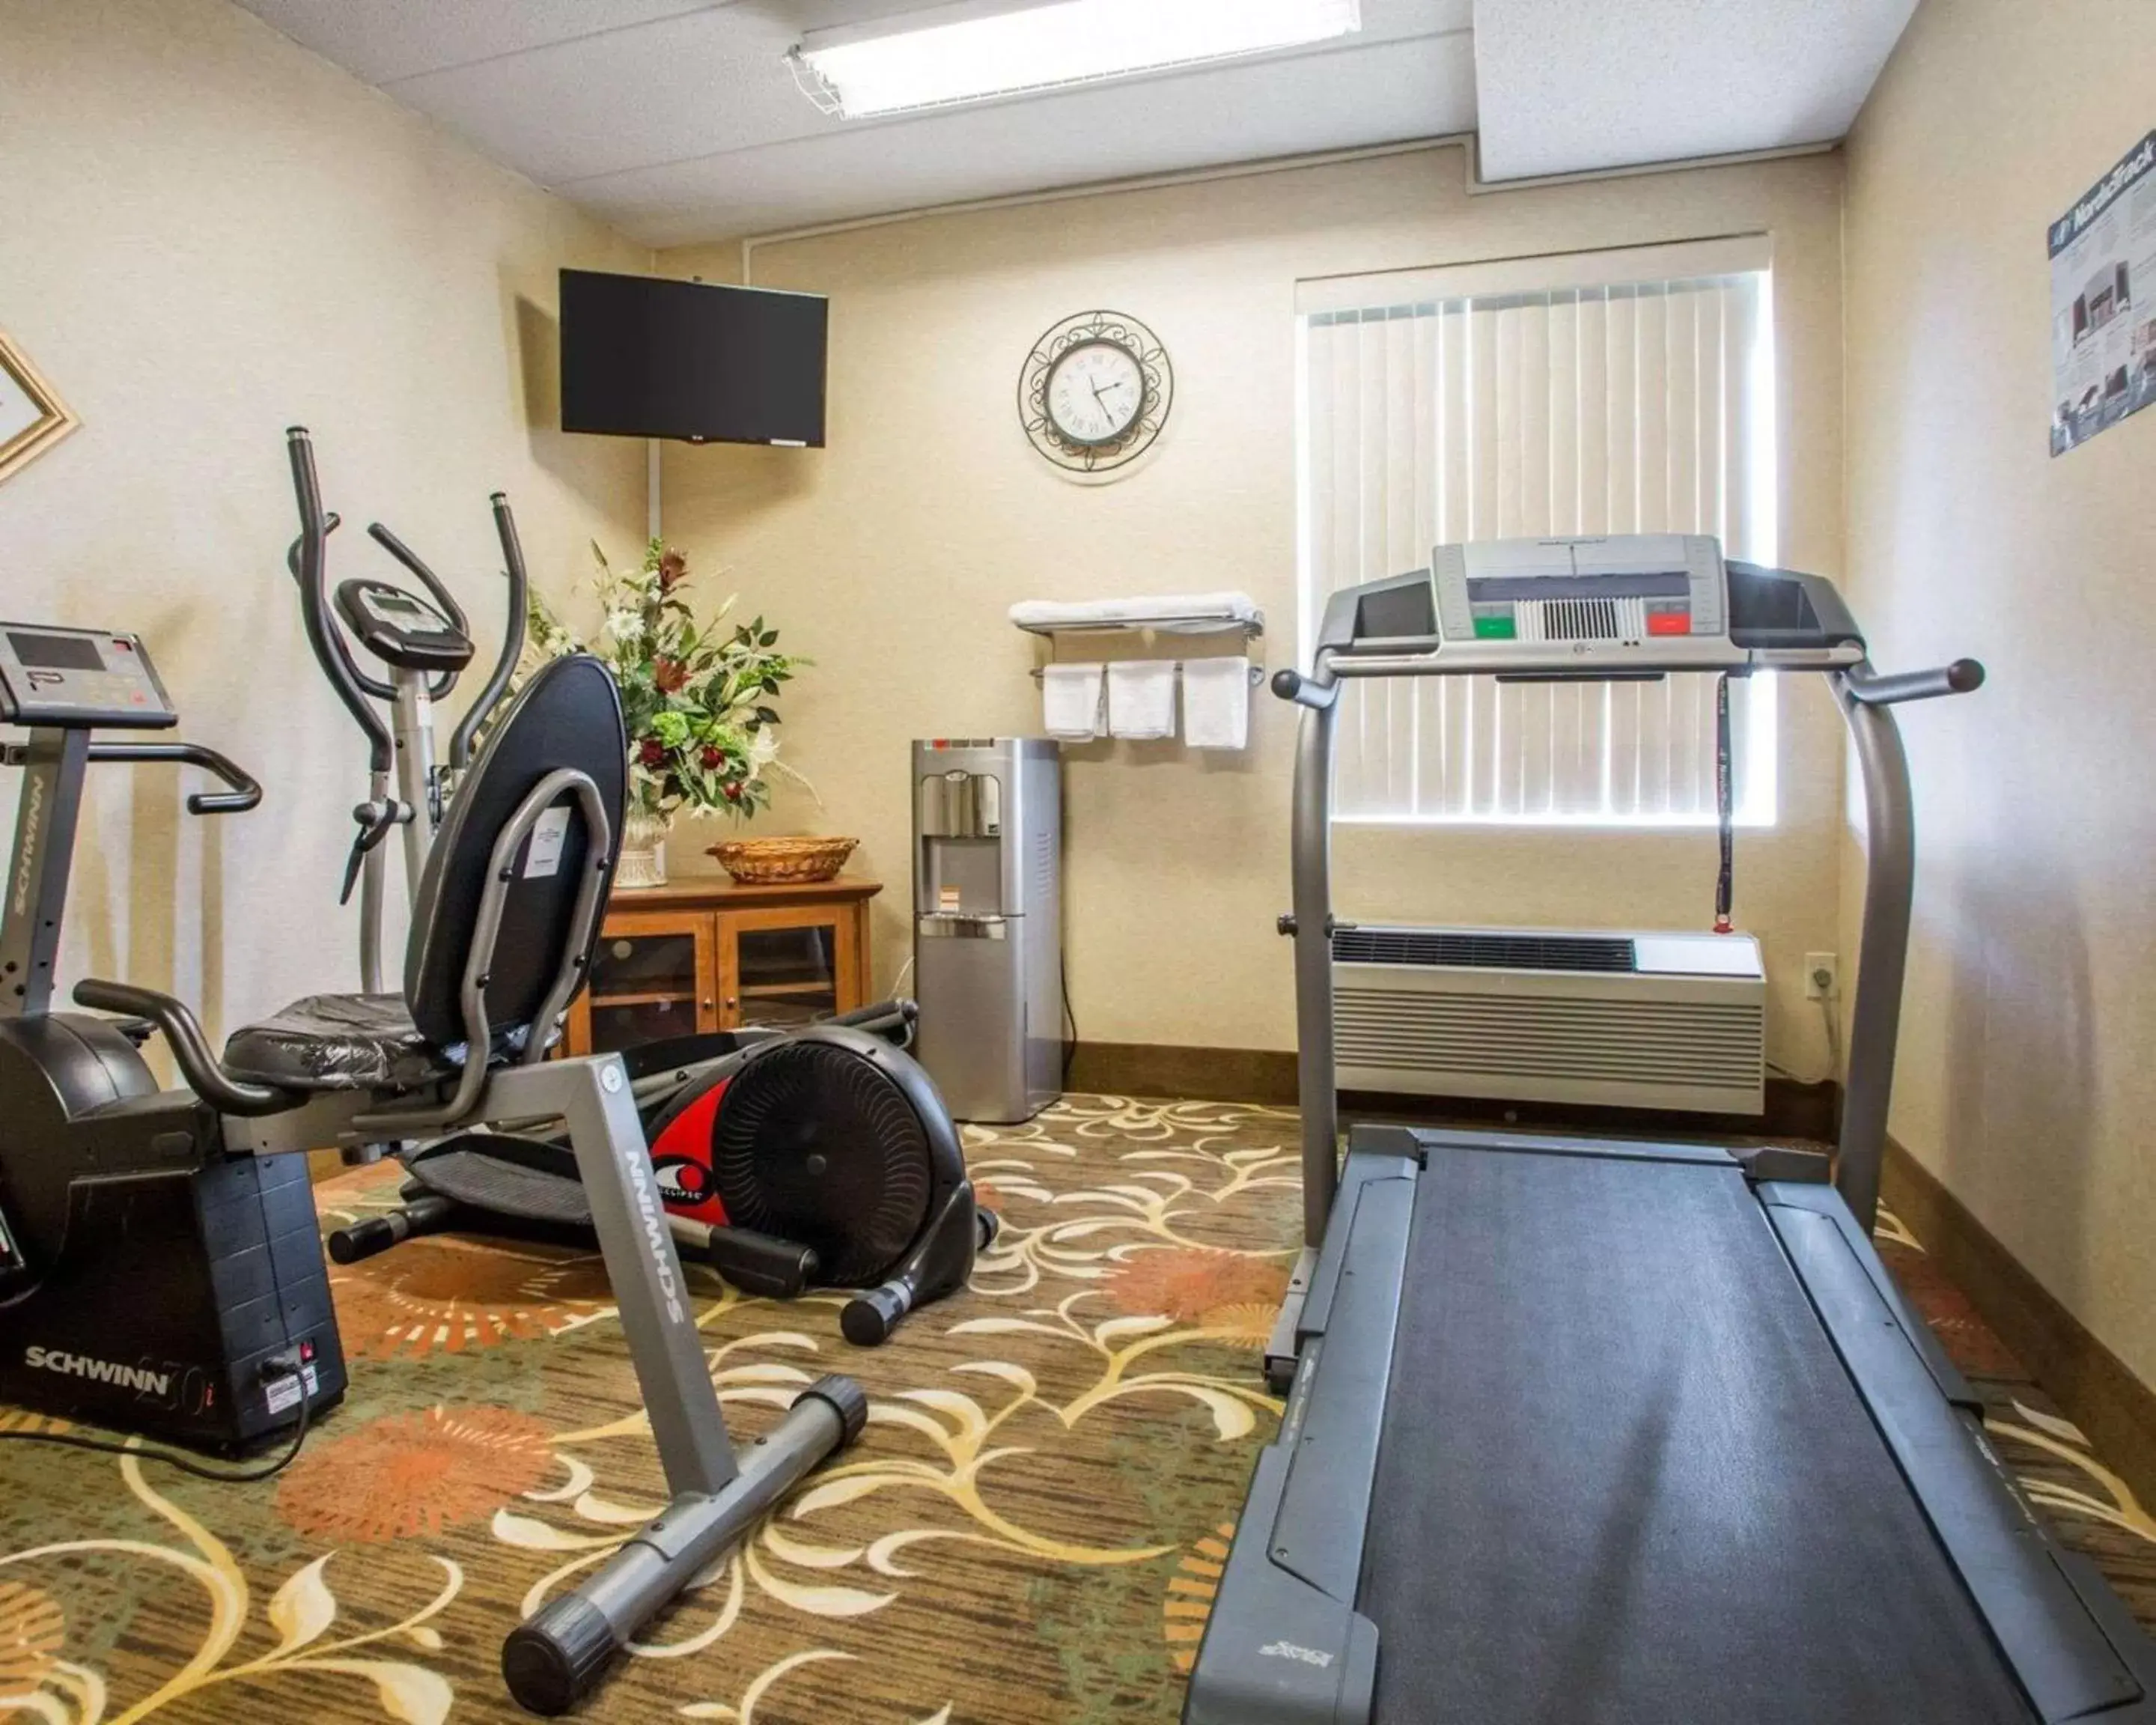 Fitness centre/facilities, Fitness Center/Facilities in Quality Inn Vineland – Millville